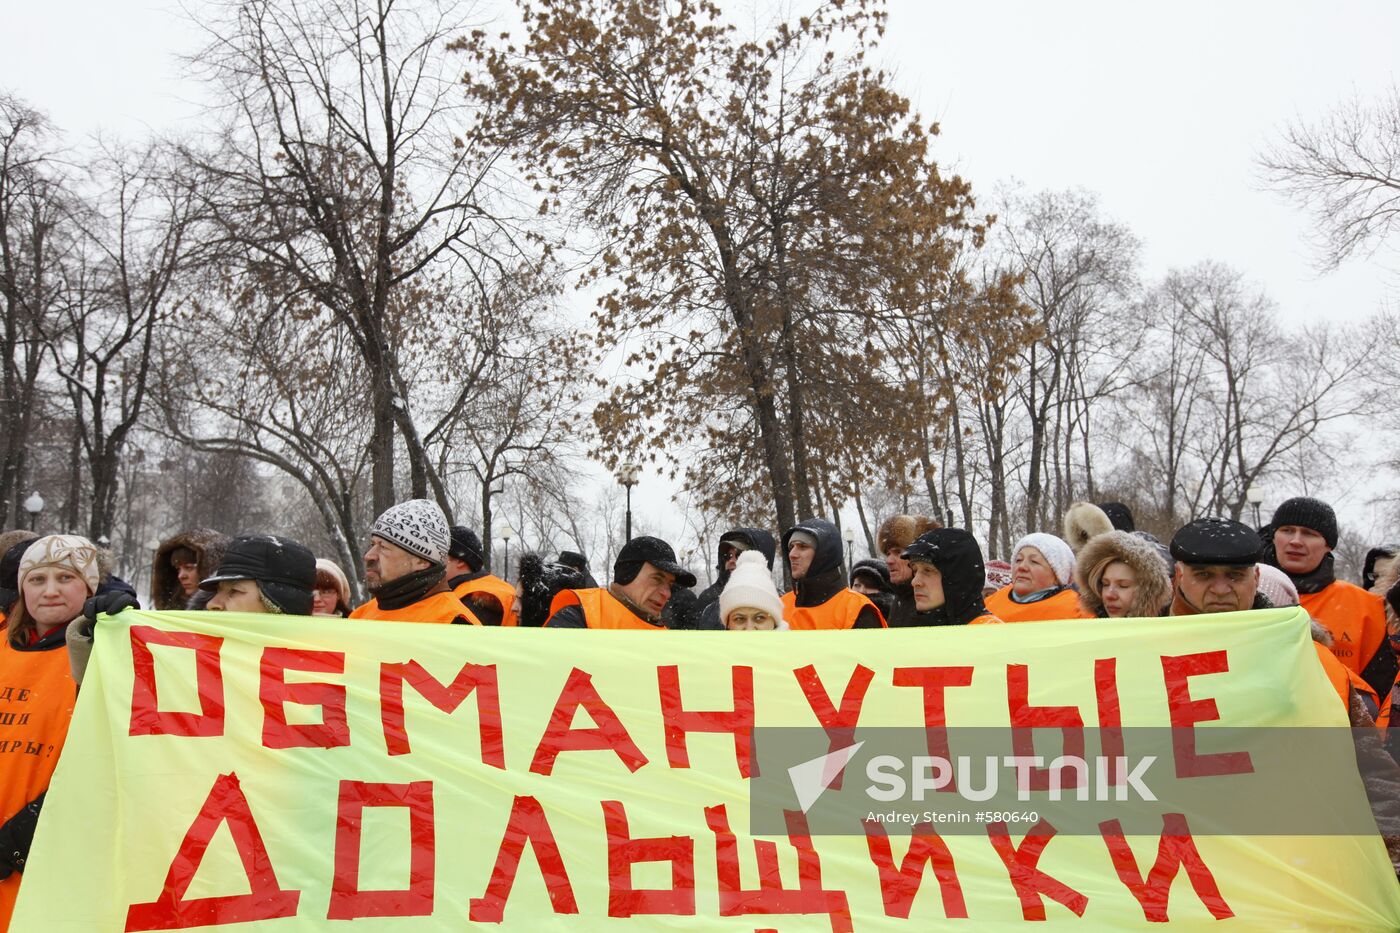 Cheated interest-holders rally in Bolotnaya Square, Moscow